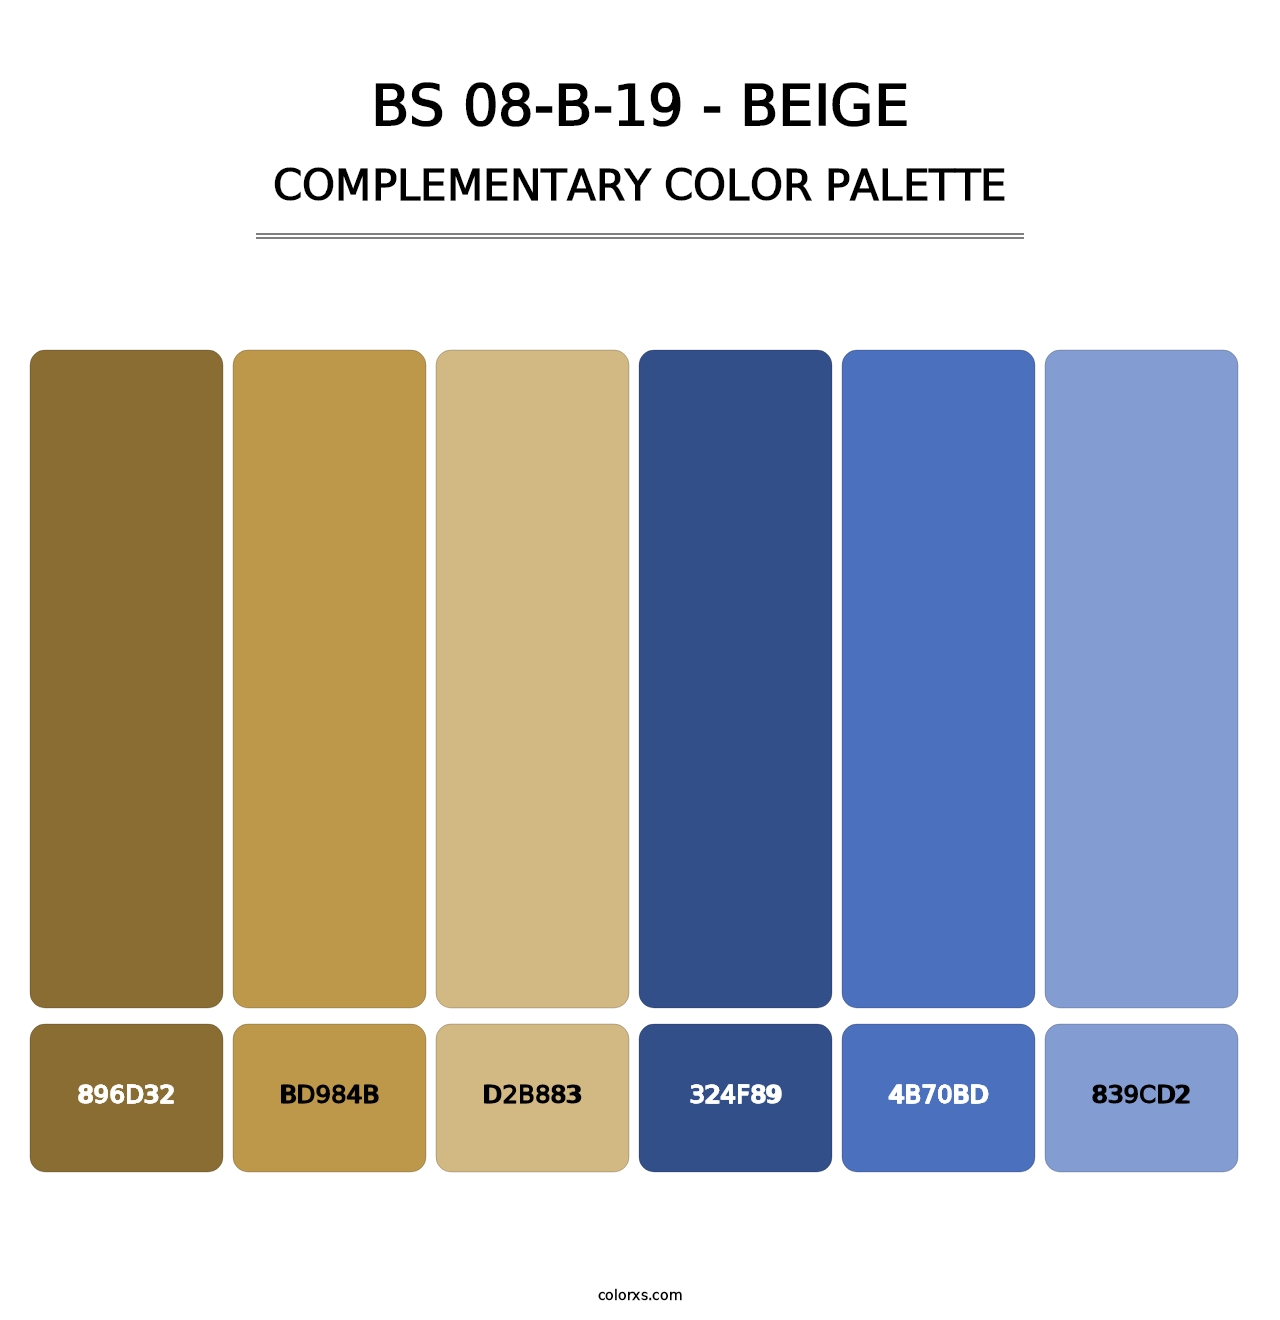 BS 08-B-19 - Beige - Complementary Color Palette